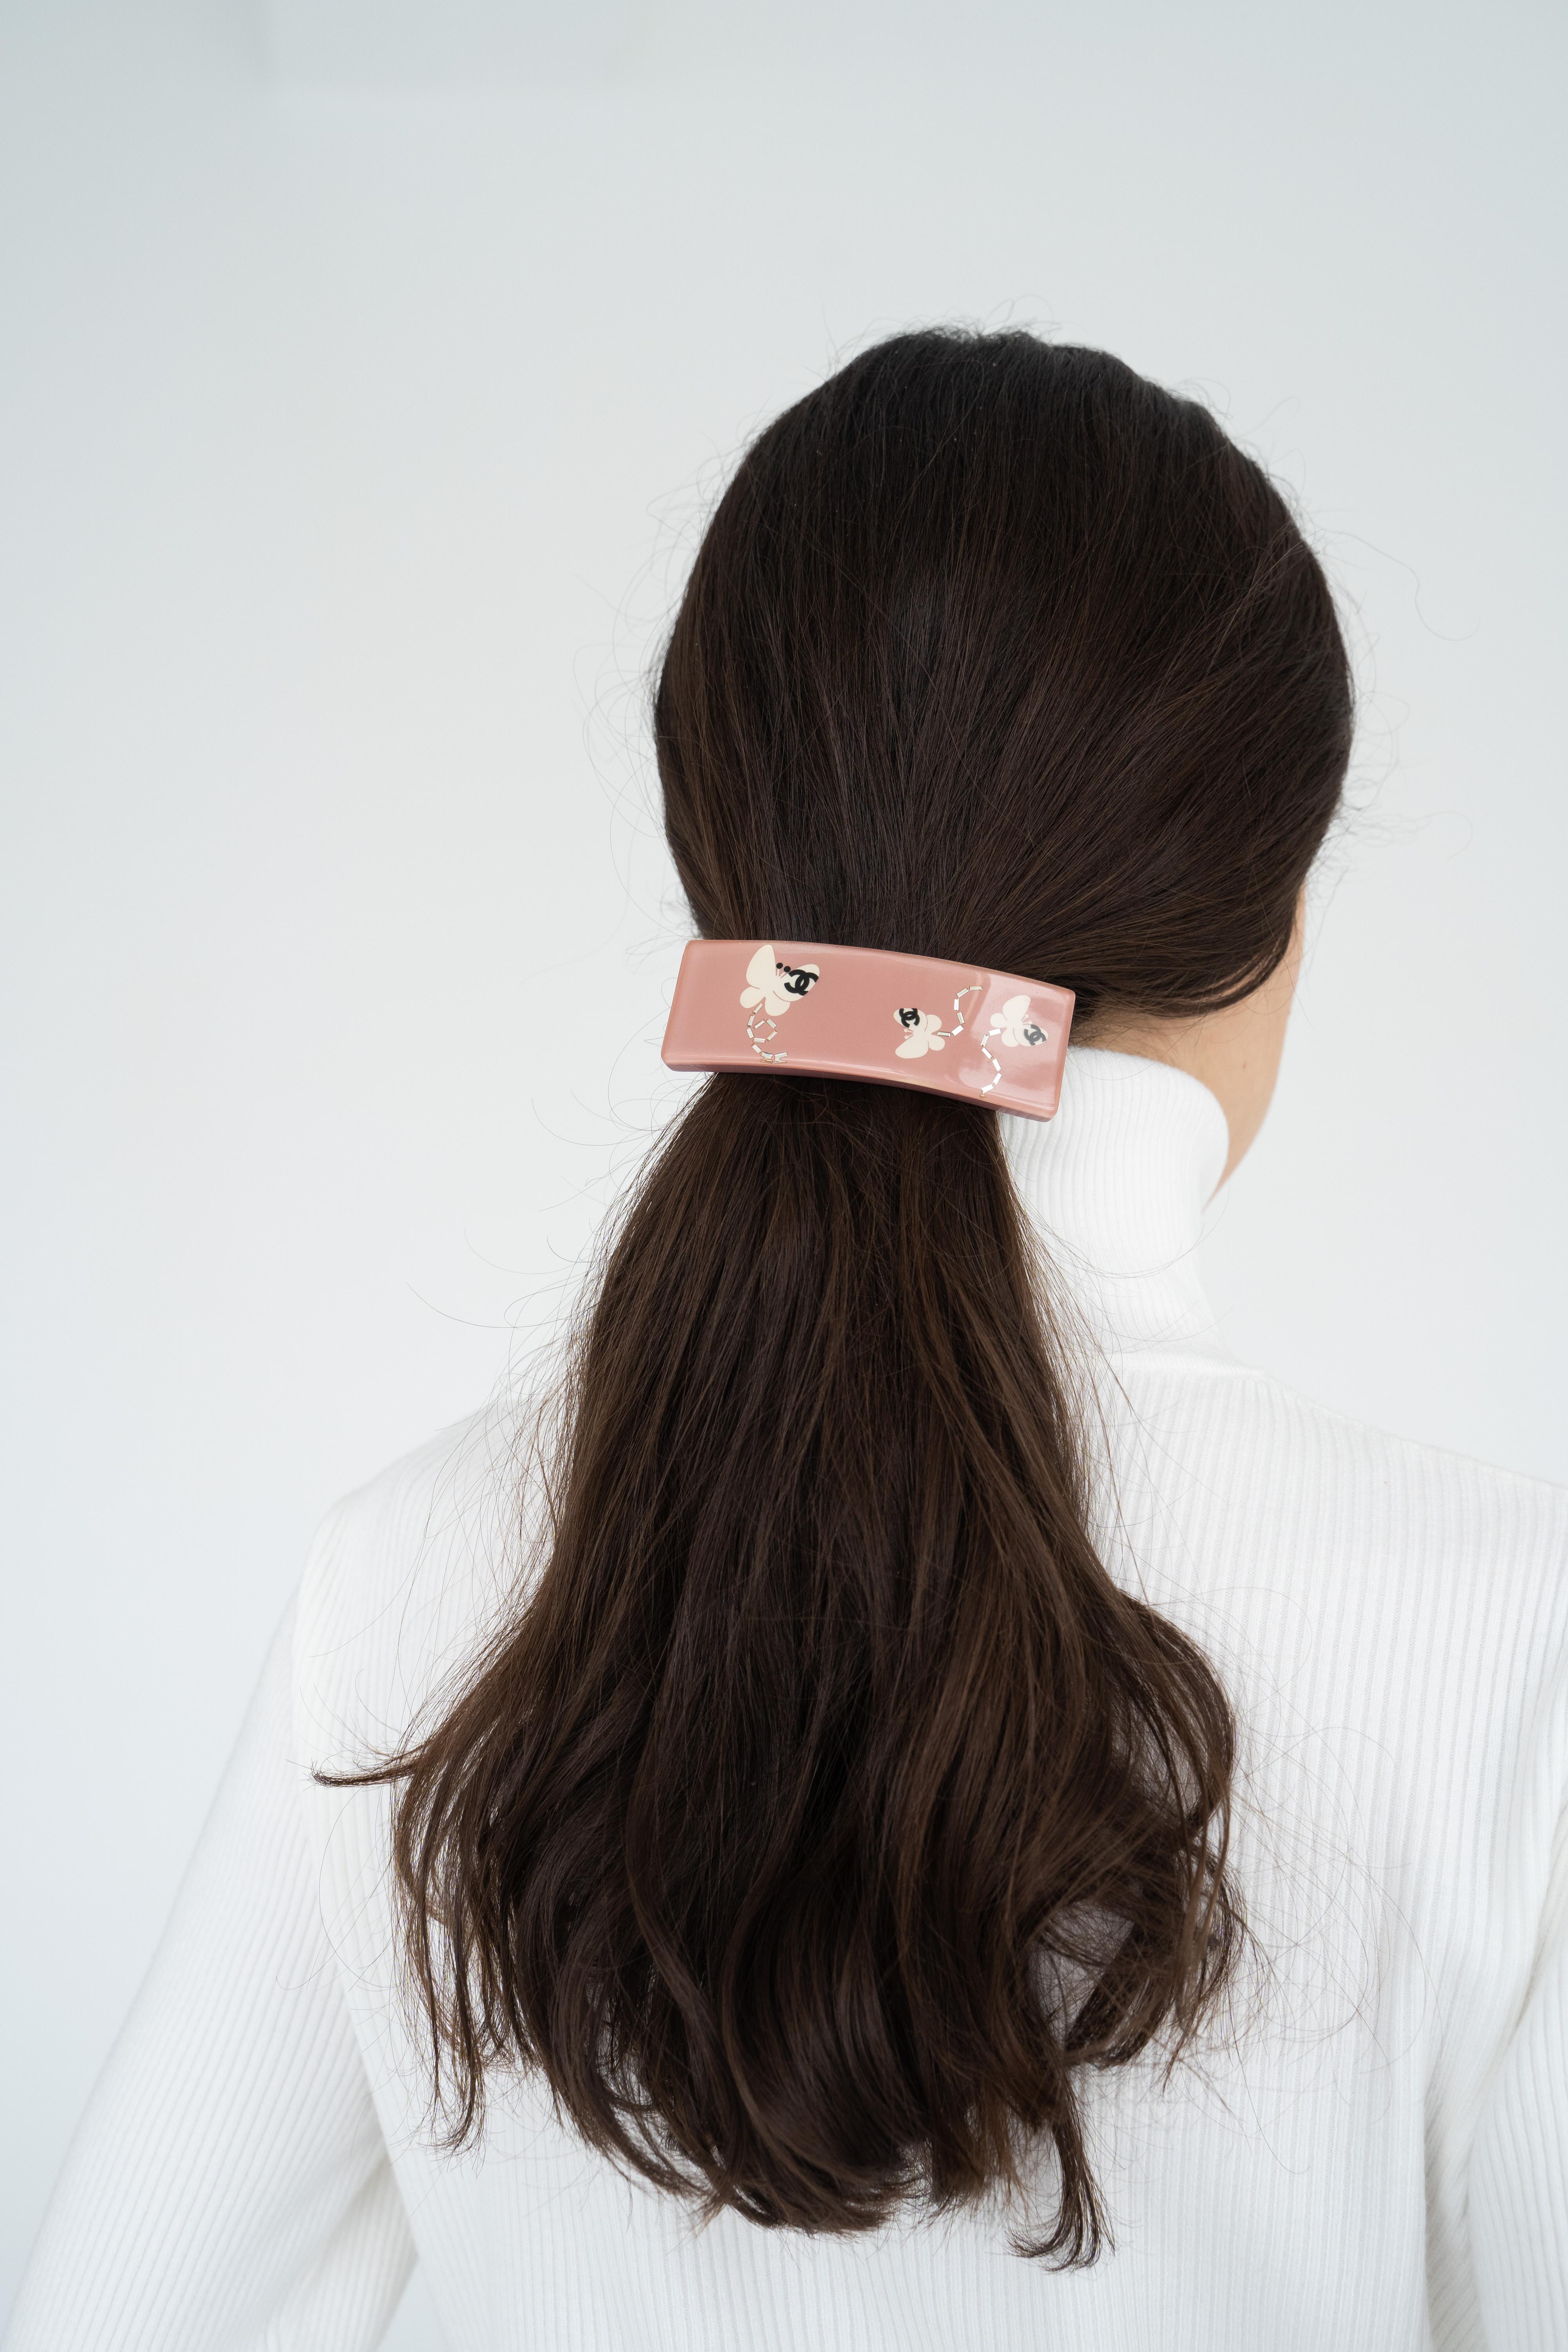 Chanel 07P Barbie style Vintage 2007 Auth CC LOGO Hair Clip Pink   In Good Condition For Sale In Алматинский Почтамт, KZ